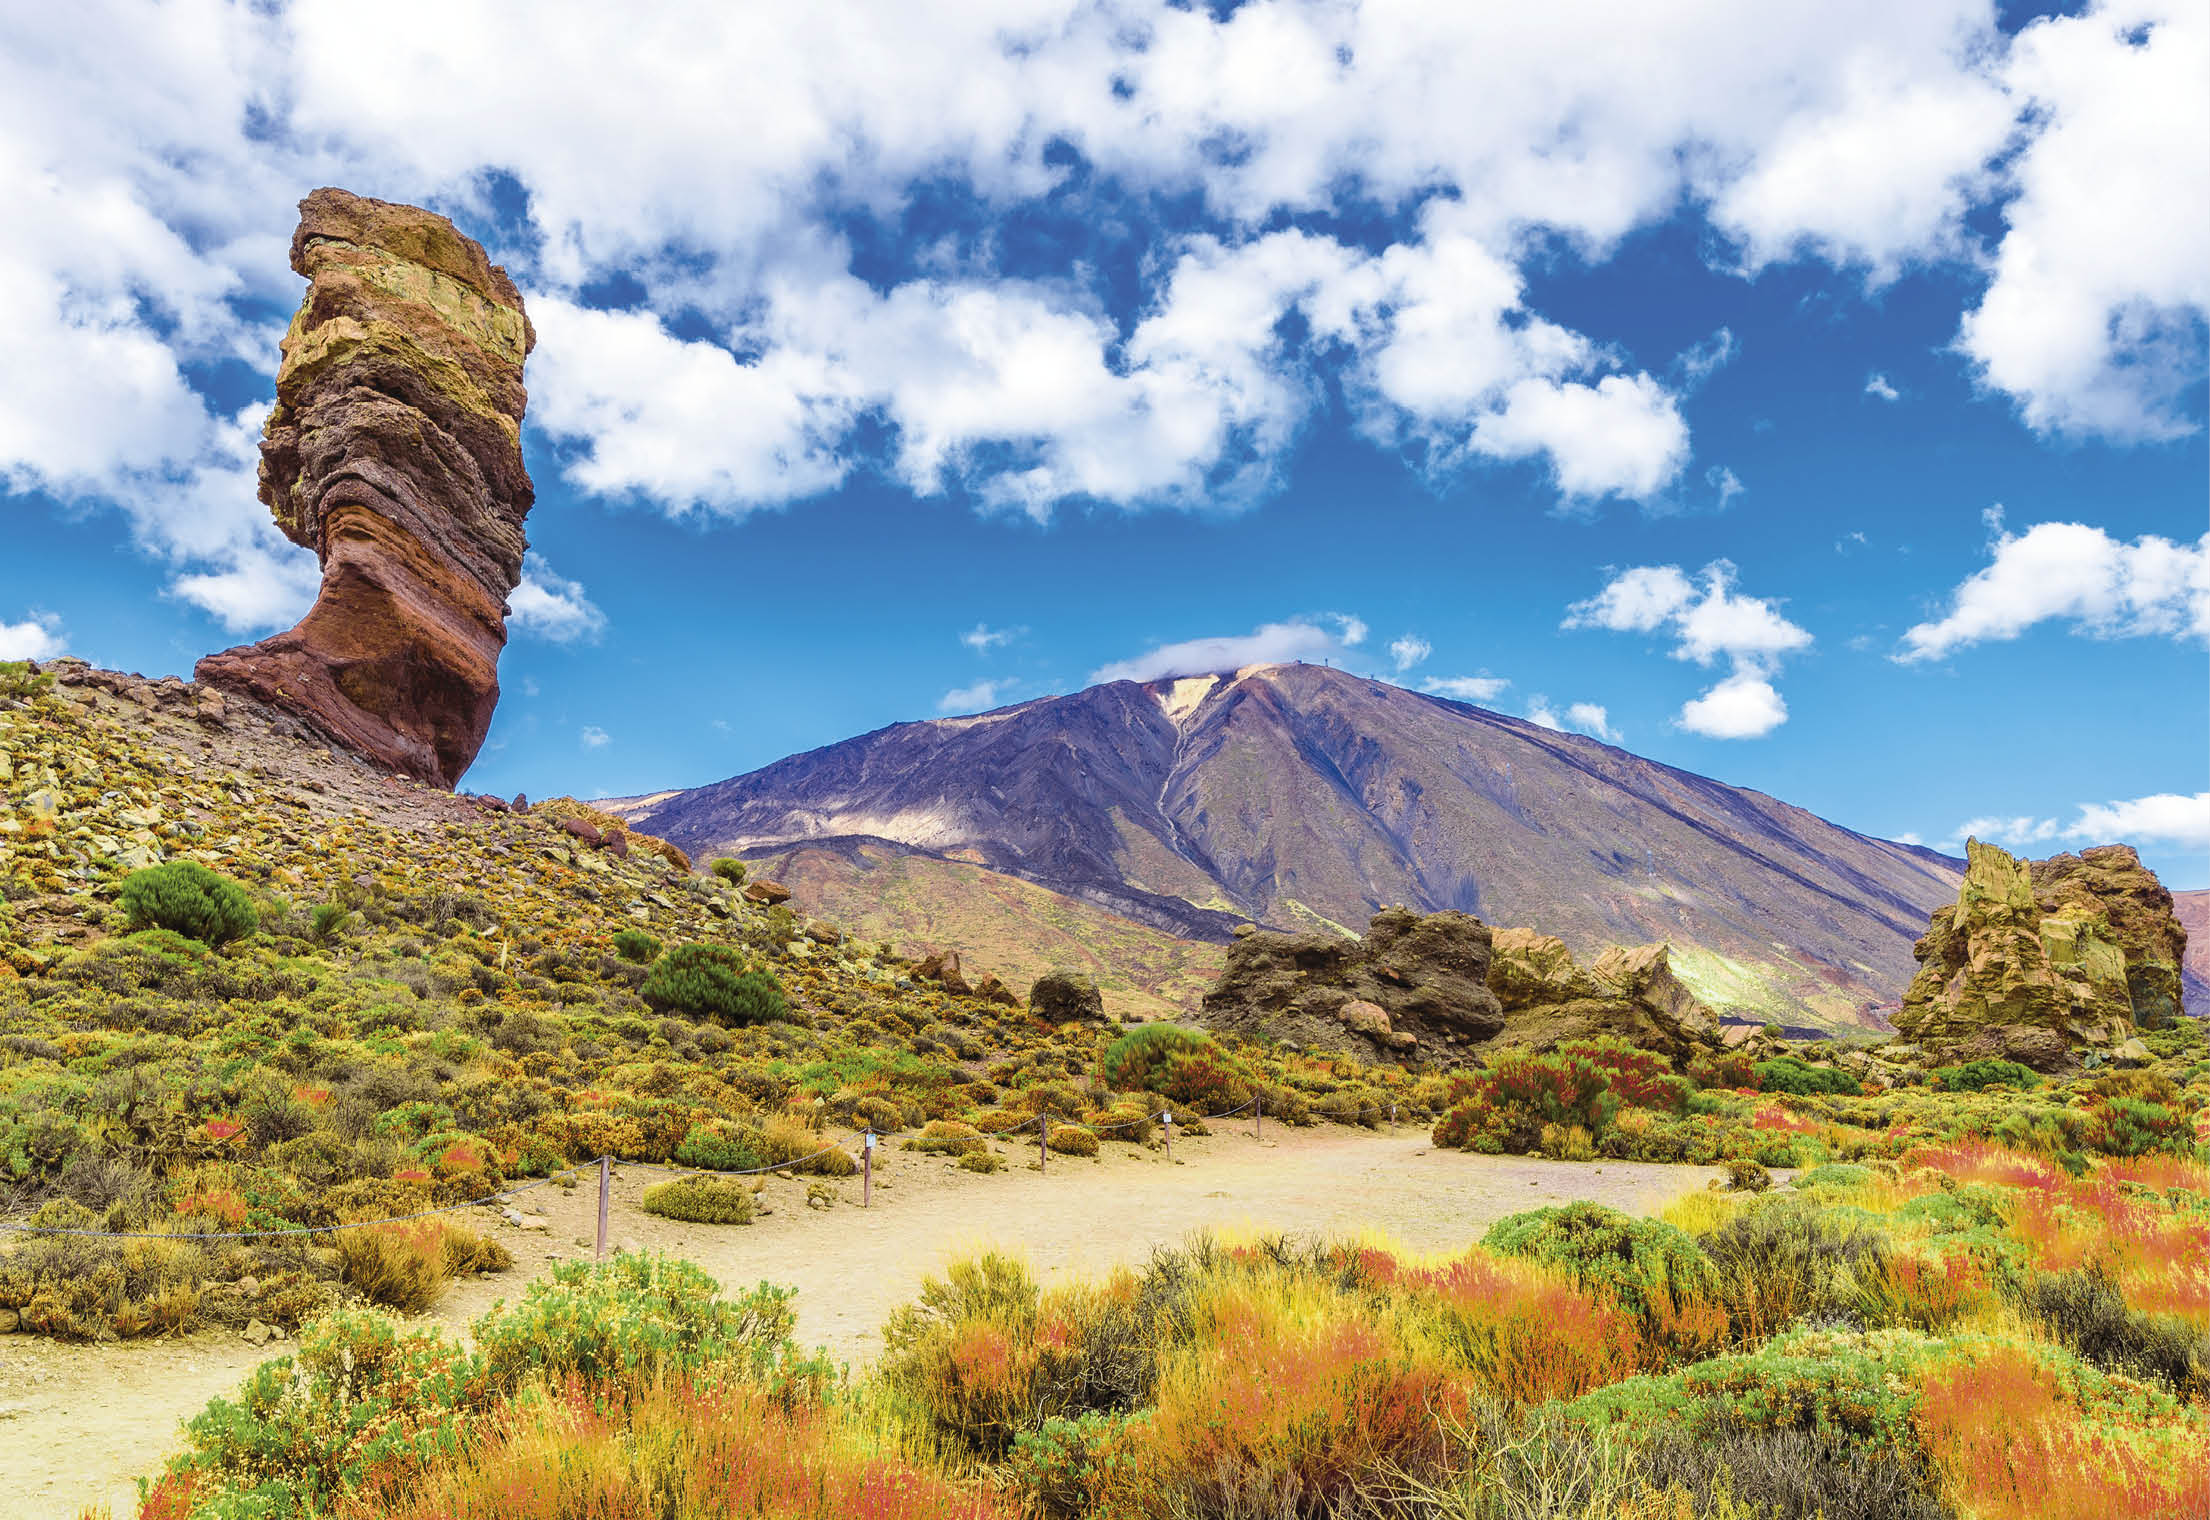 View of Roques de Garcia formation and Teide mountain volcano in Teide National Park, Tenerife, Canary Islands, Spain.